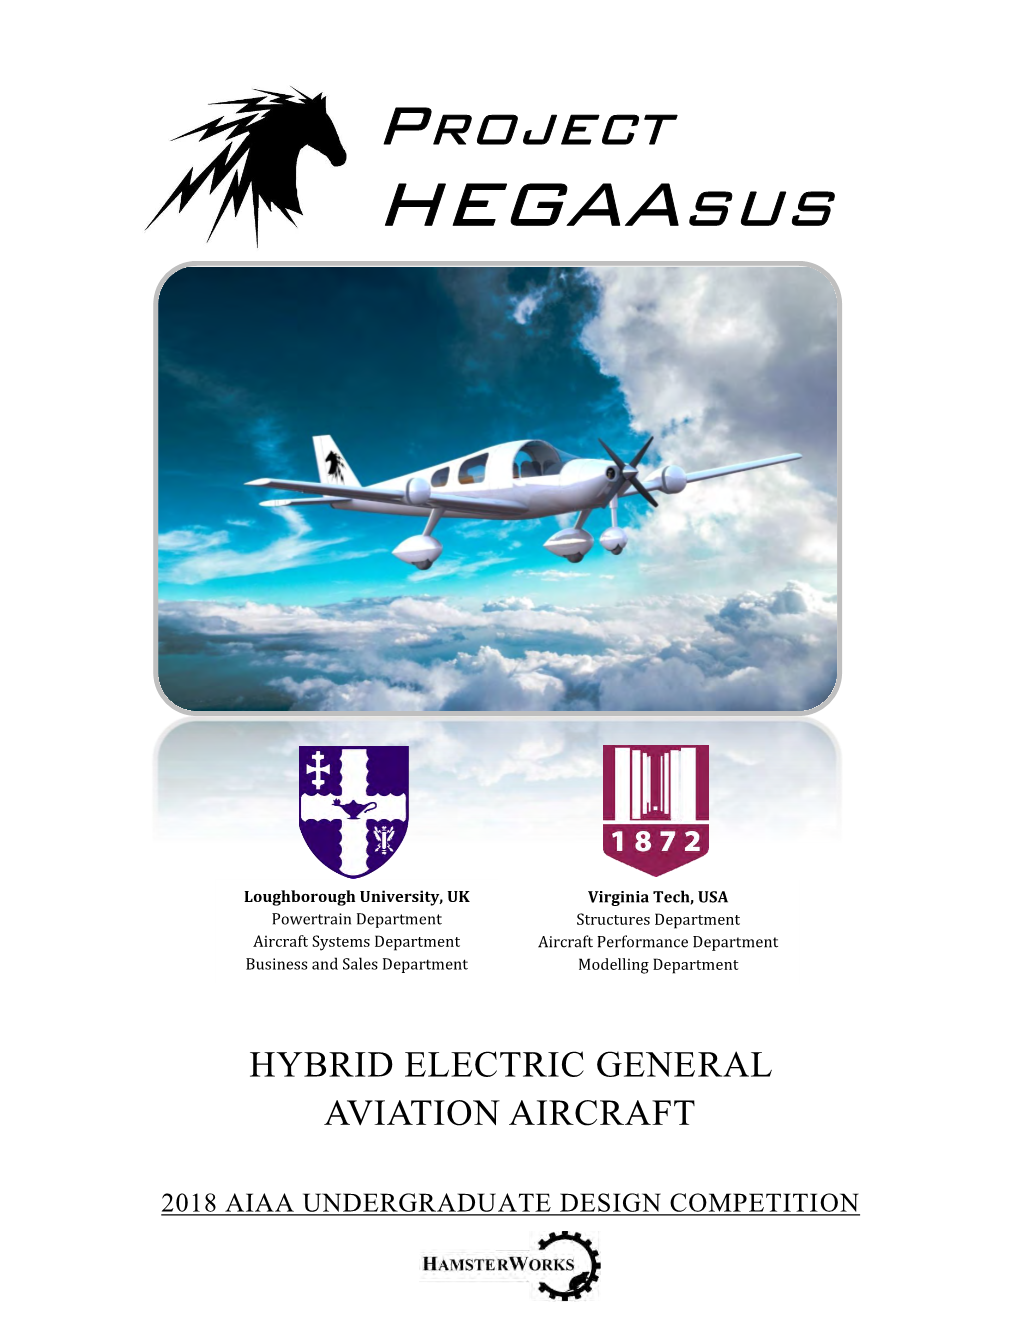 Project Hegaasus